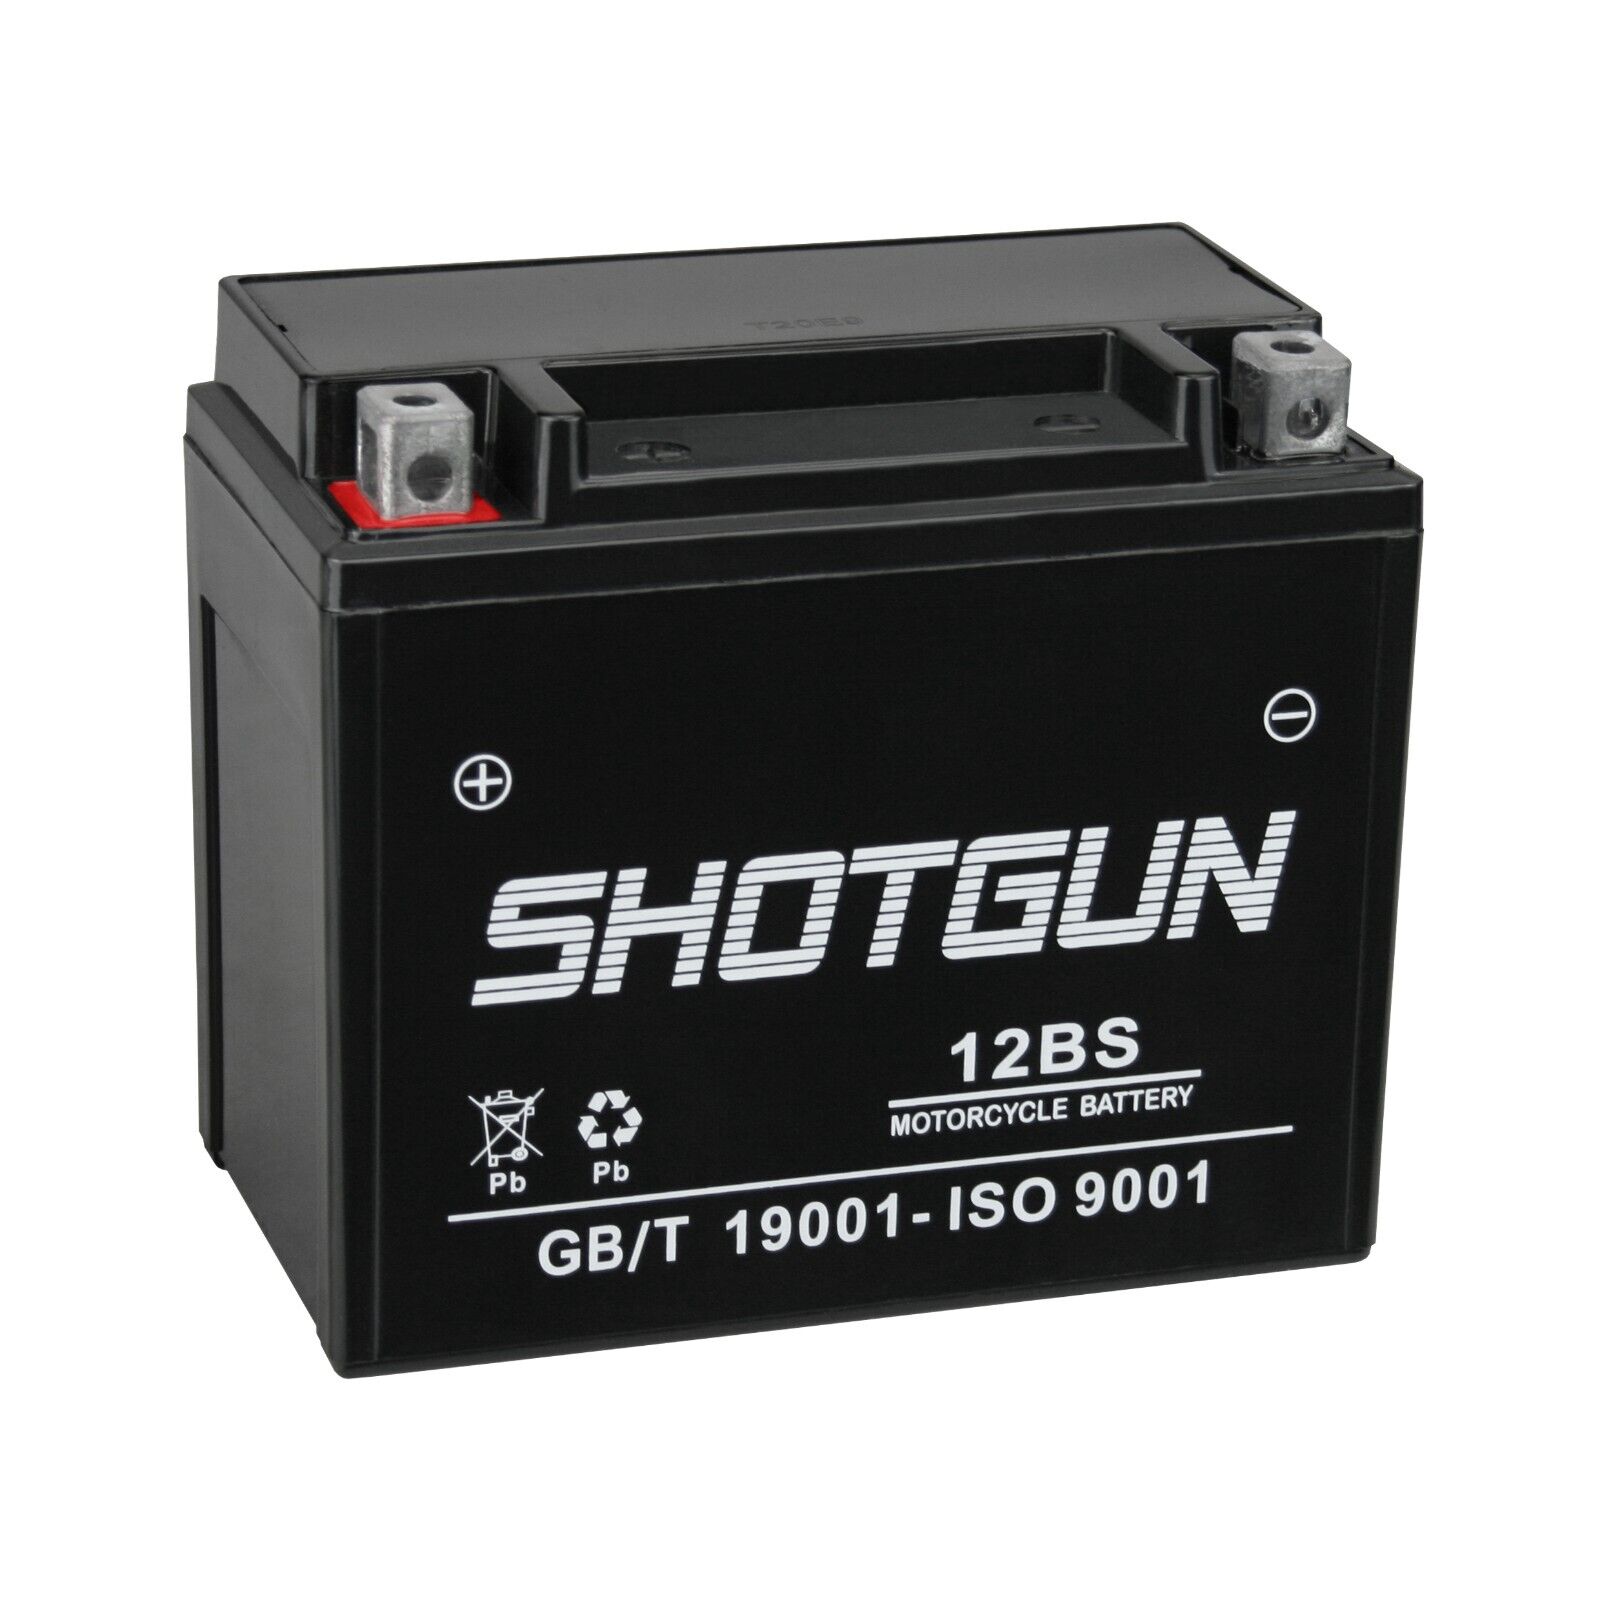 Shotgun Replaces 12V 12-BS High Performance Maintenance Free Motorcycle Battery